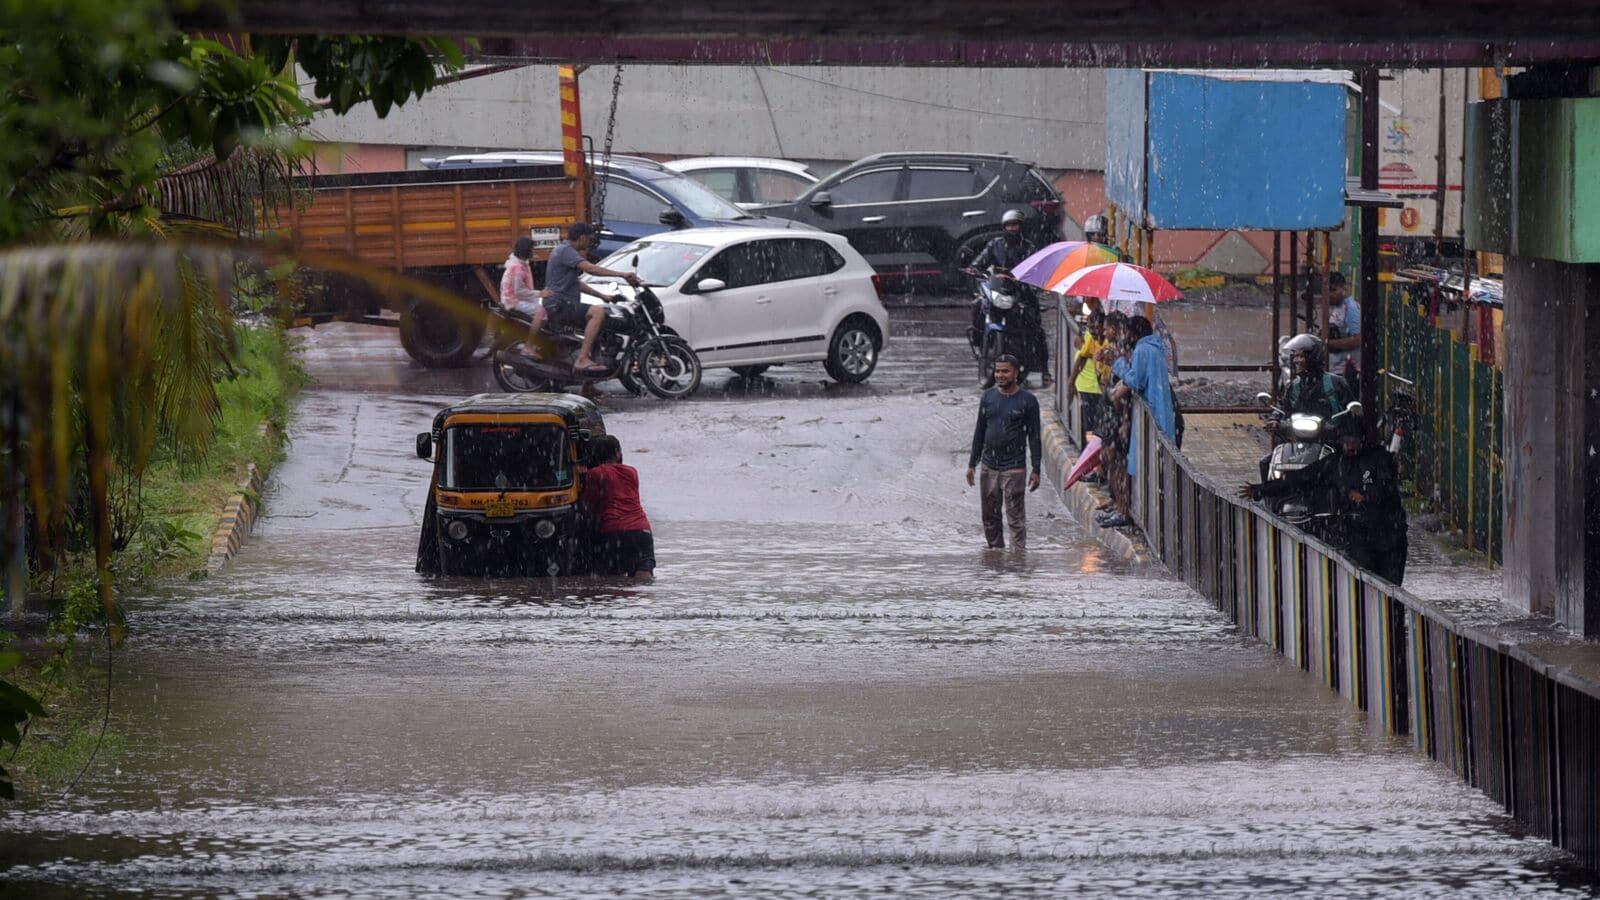 Mumbai weather today: Heavy rains lash parts of the city, IMD issues yellow alert; know details